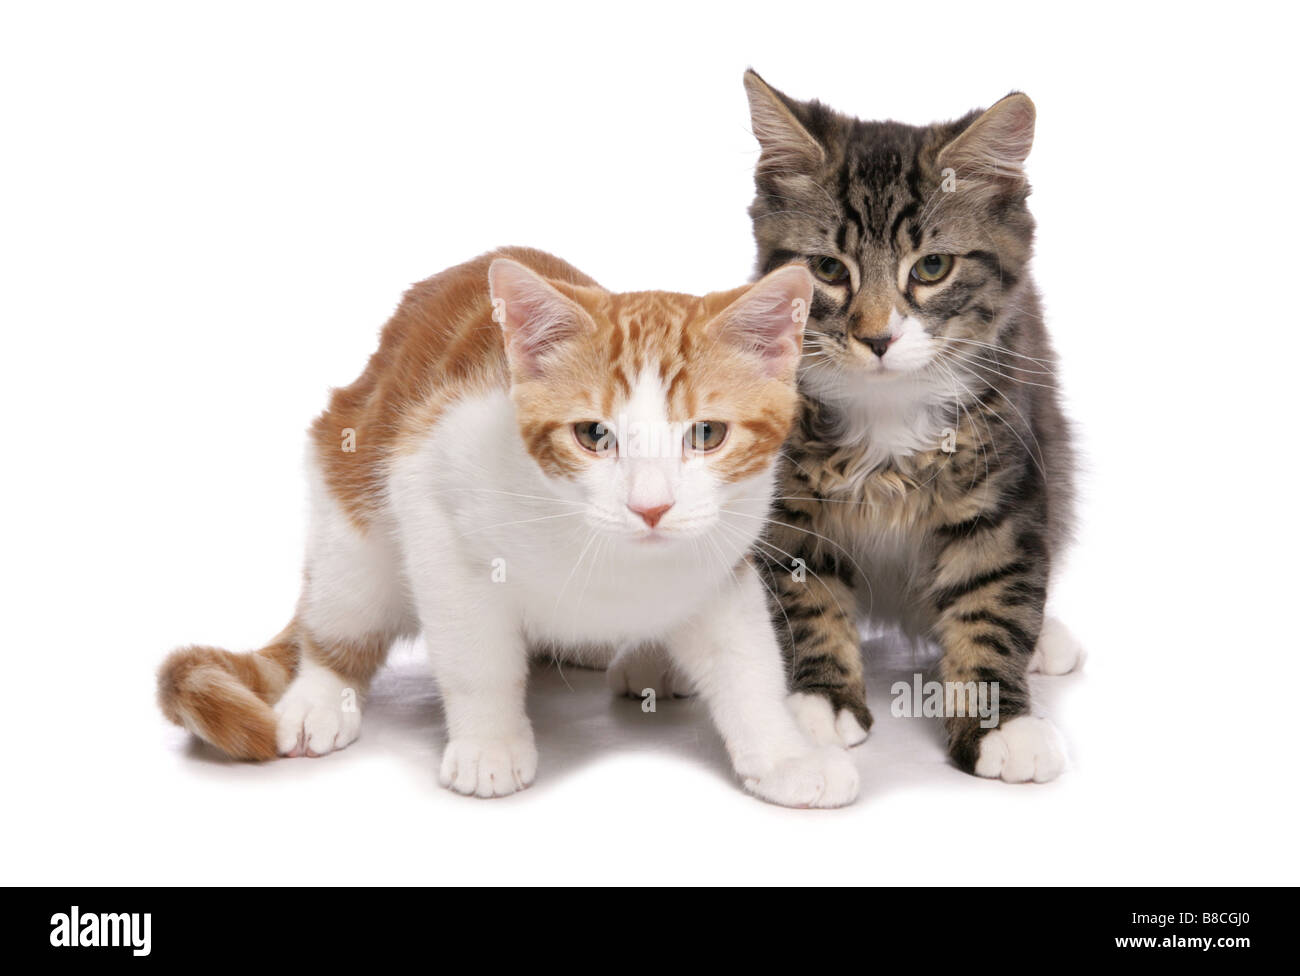 Tabby and Ginger Cats Sitting Studio Stock Photo